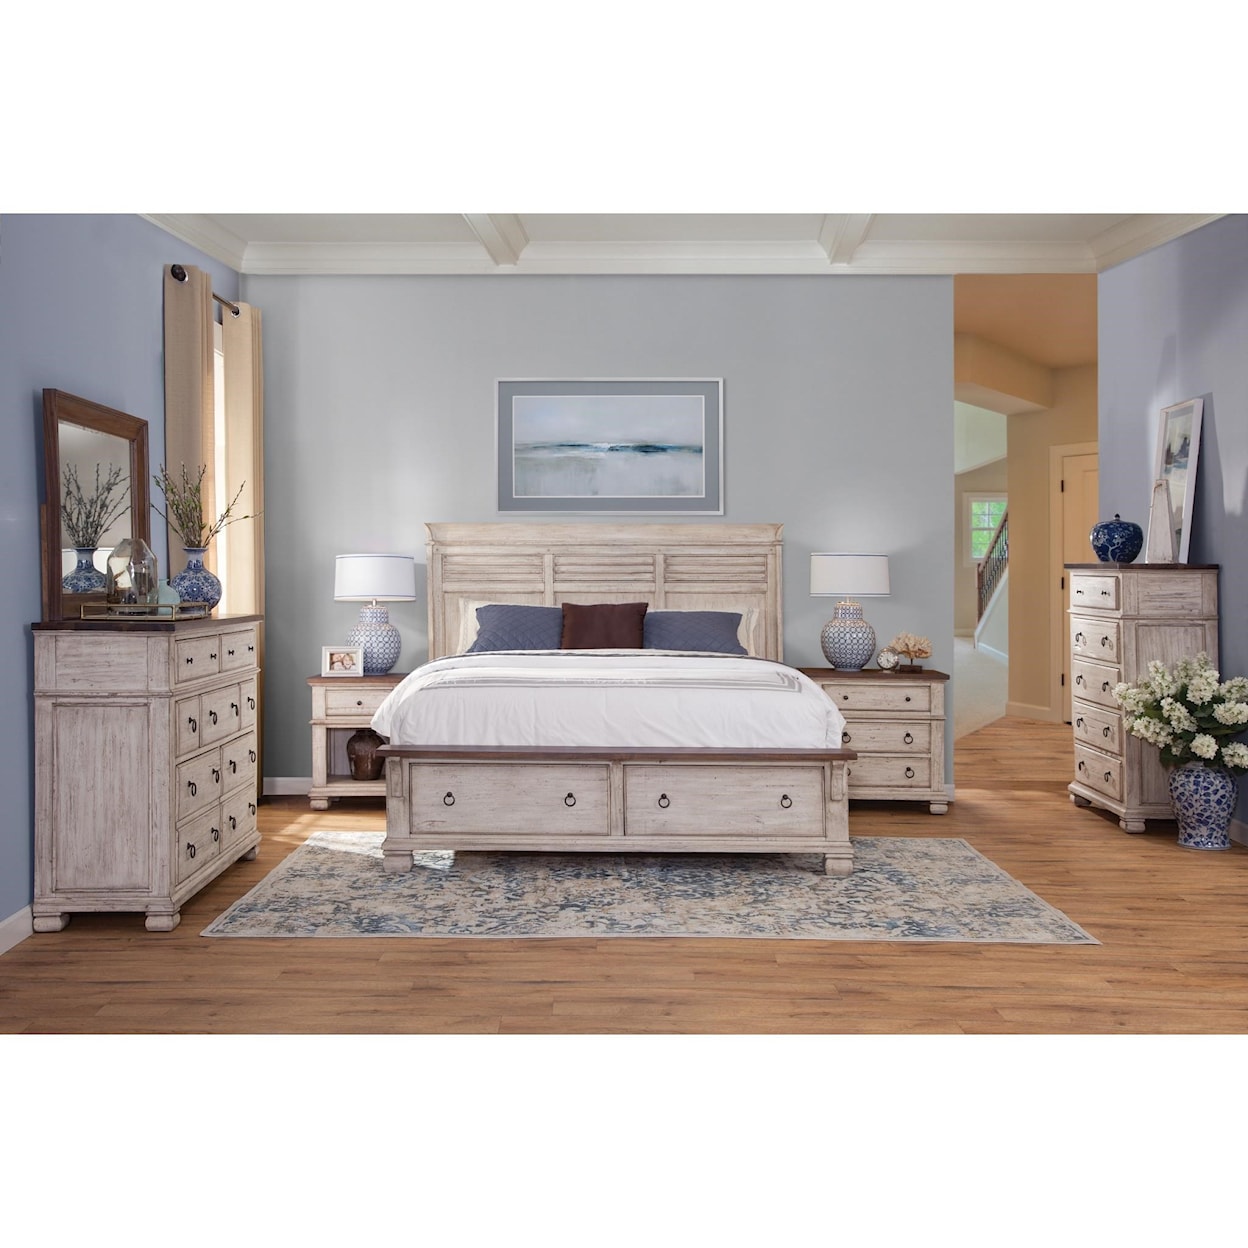 Virginia Furniture Market Solid Wood Normandy Chest of Drawers